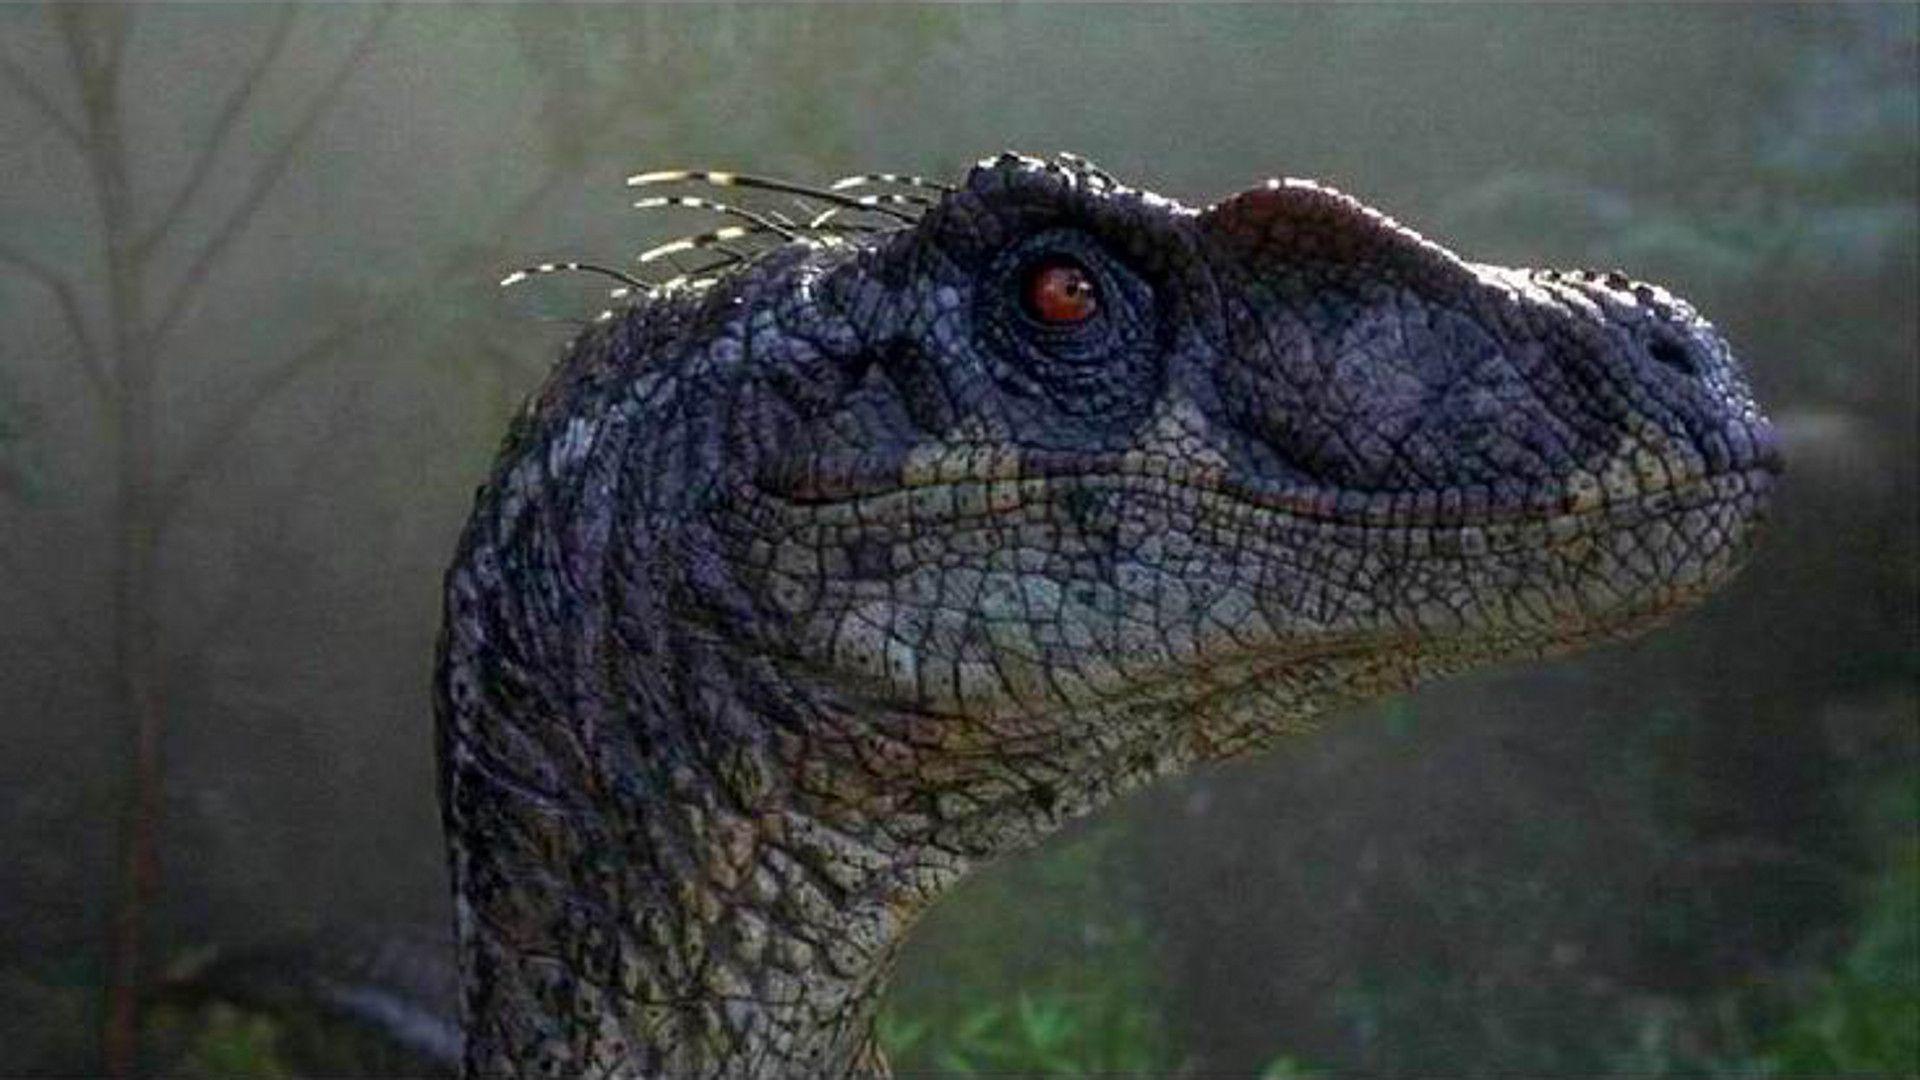 Jurassic Park III' brings the original trilogy to an end with a dull